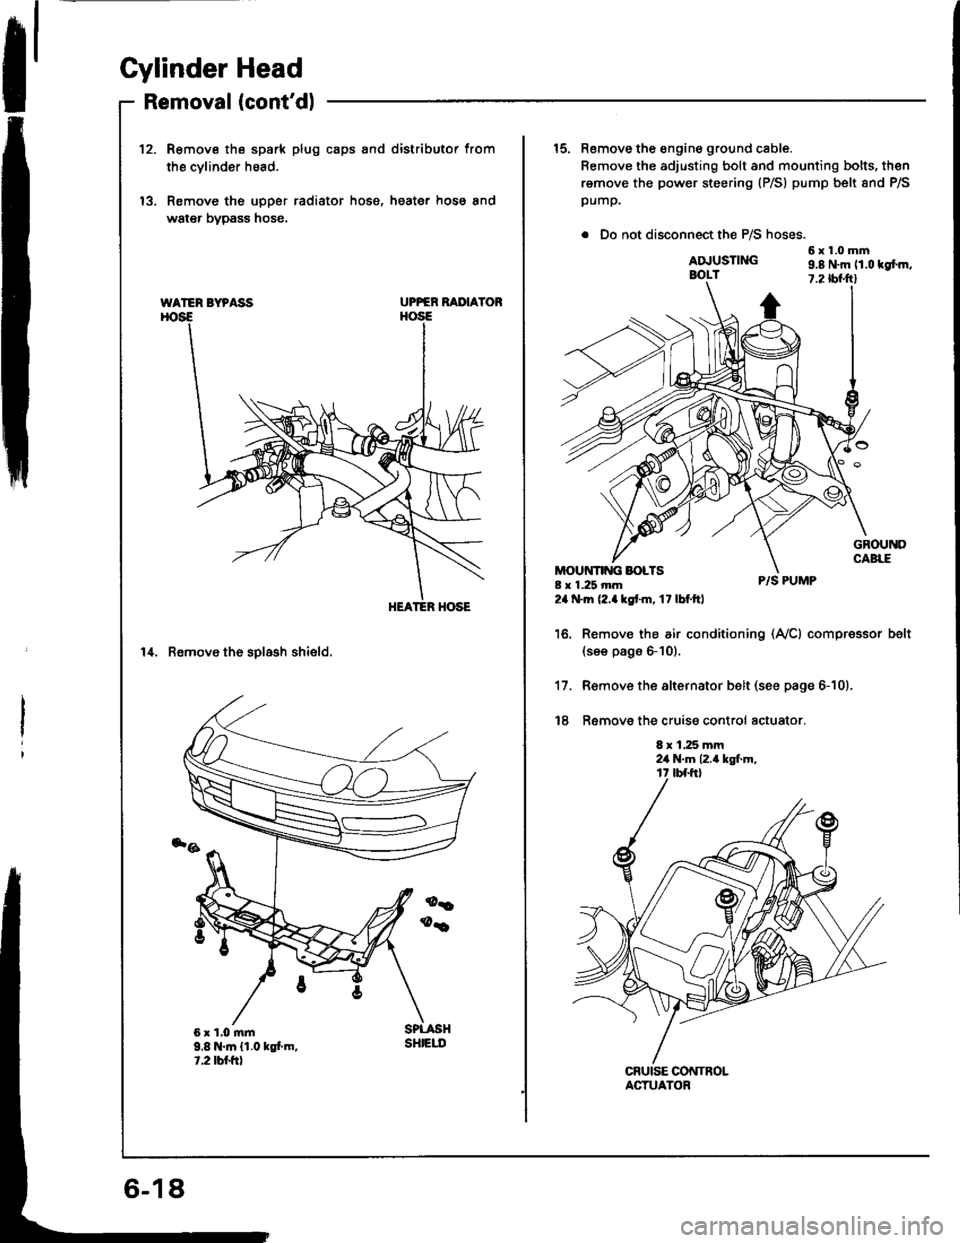 HONDA INTEGRA 1994 4.G Workshop Manual Cylinder Head
Removal (contdlI
12.R€move the spark plug caps and distributor from
the cvlinder head.
Remove the upper radiator hose, heater hose and
water bypass hose.
UPPER RAIIAYOR
14. Remove th